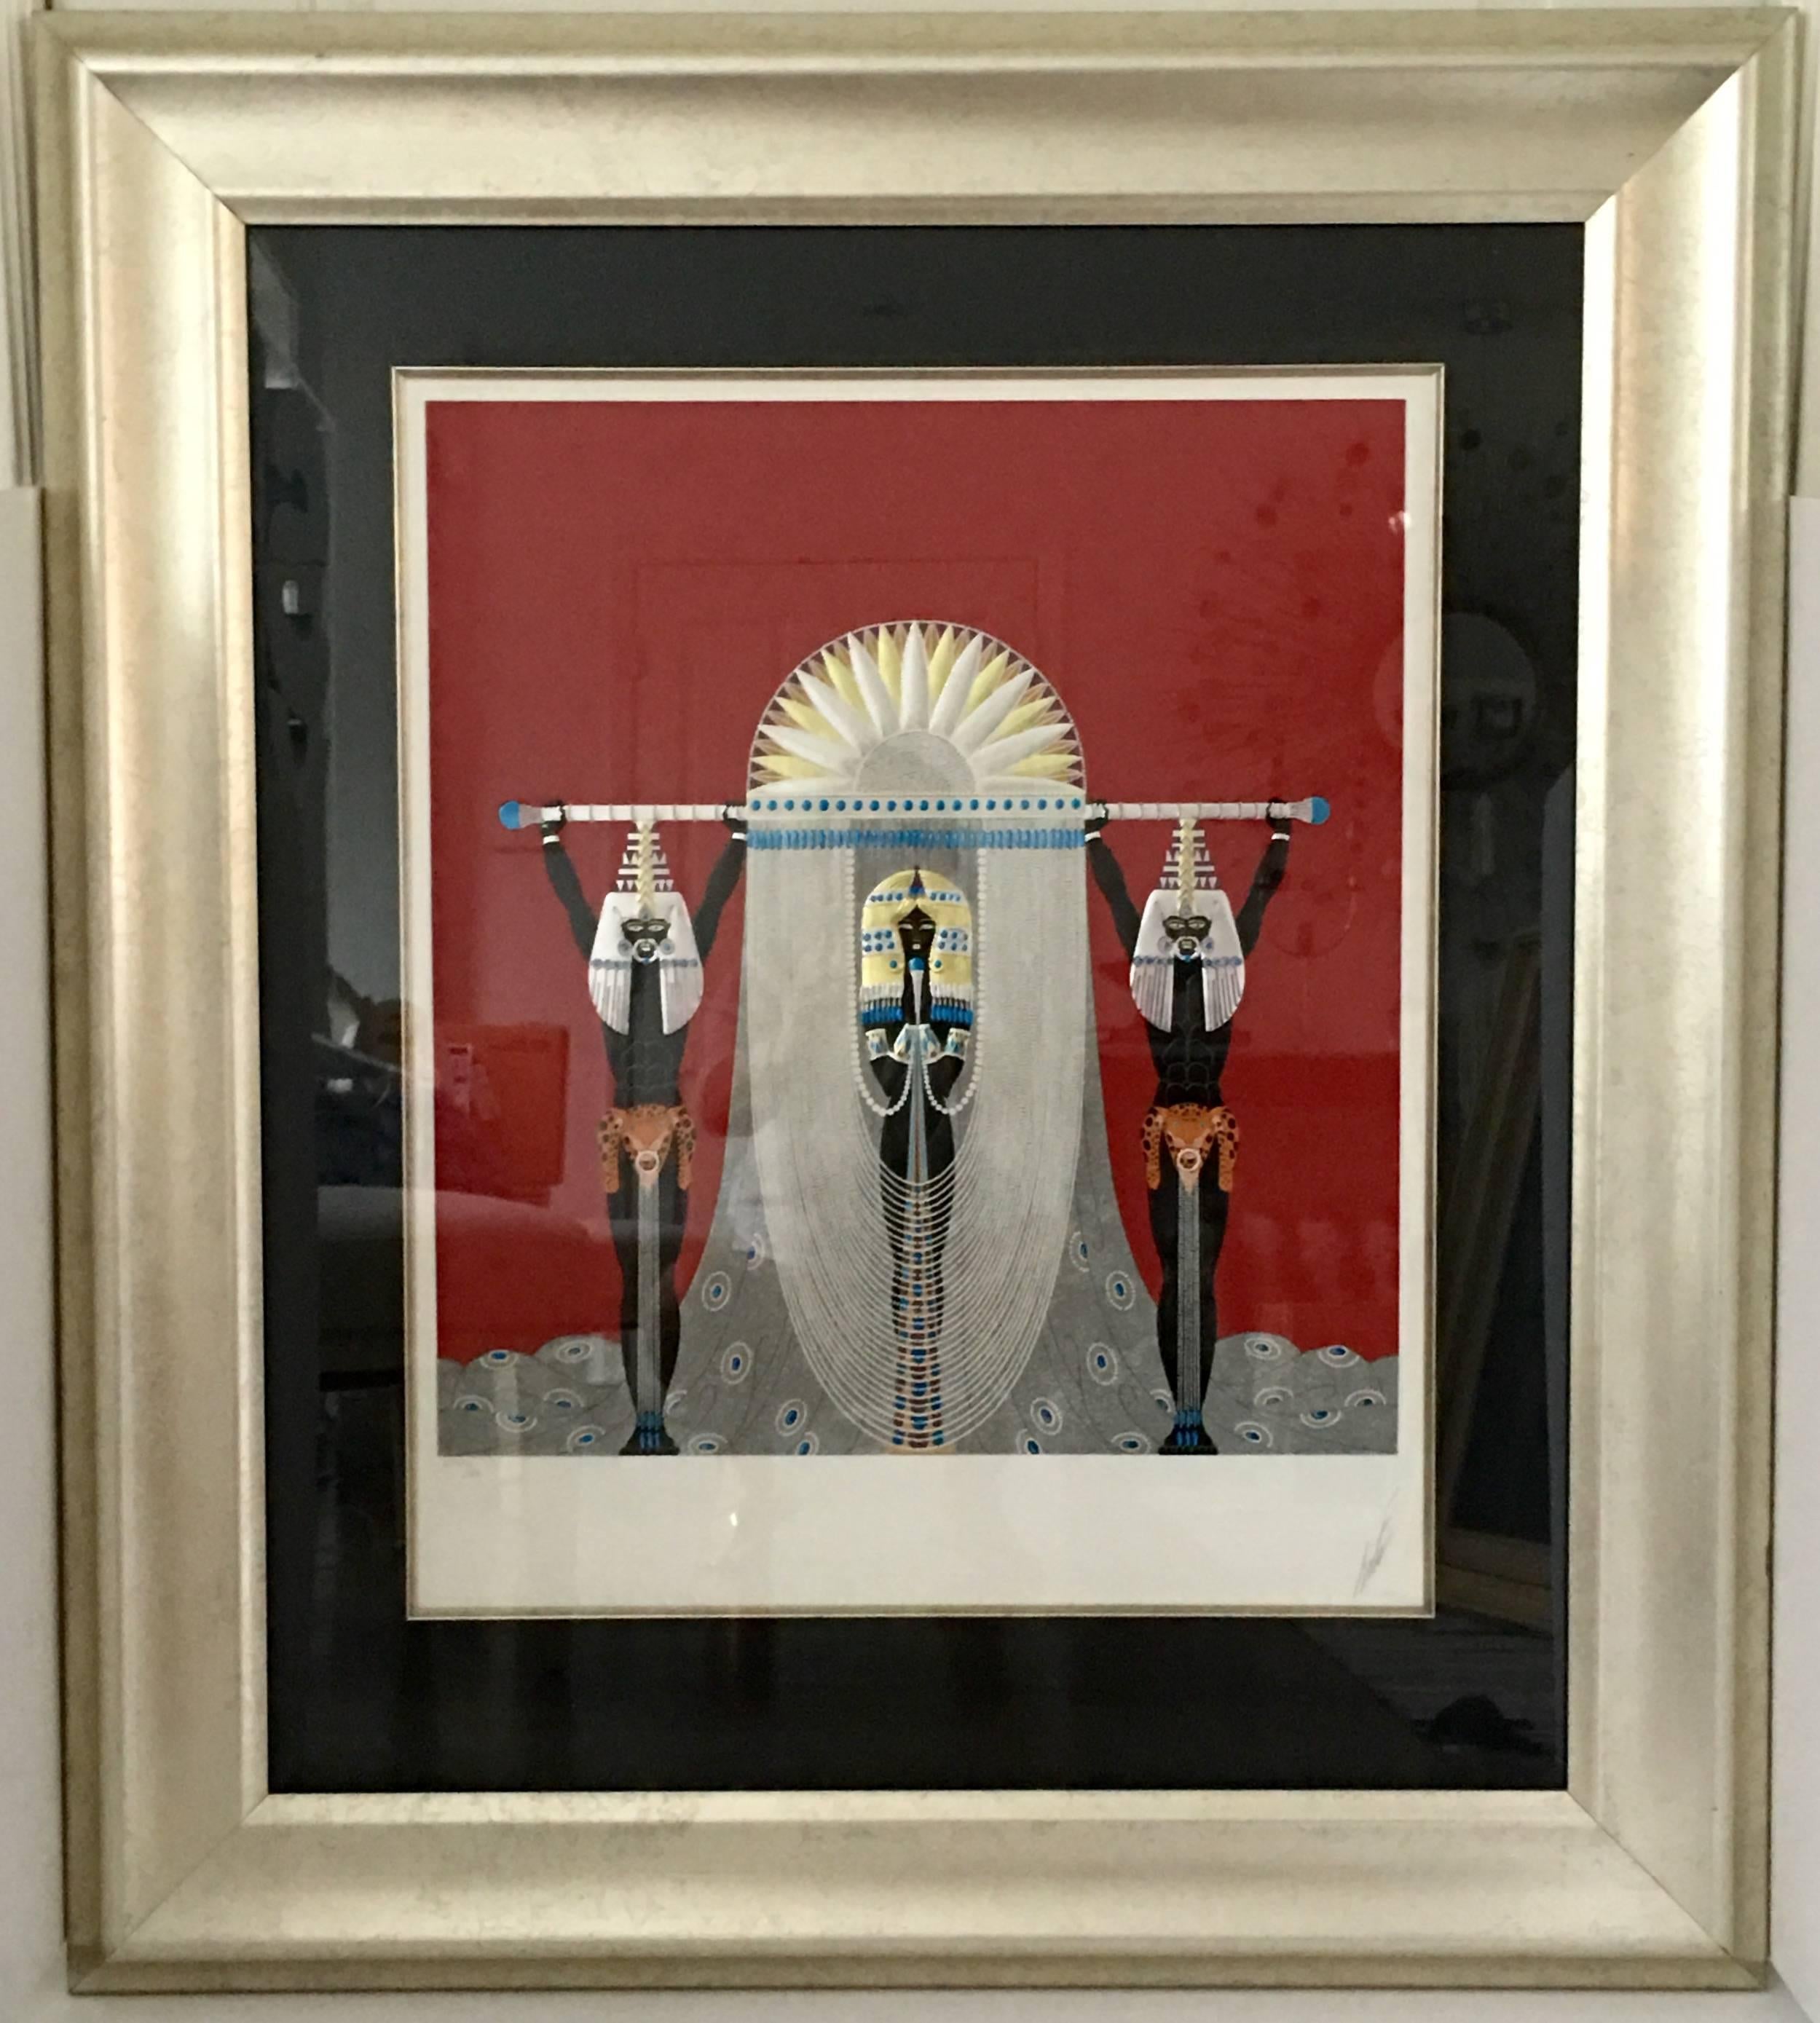 1986 Serigraph by, Romain De Tirtoff "The Egyptian" hot stamped and embossed, limited edition of 300. Hand signed by Erte, lower right margin and numbered, CXVIII/CL lower left margin. Frame is beautiful silver leaf over wood.
The